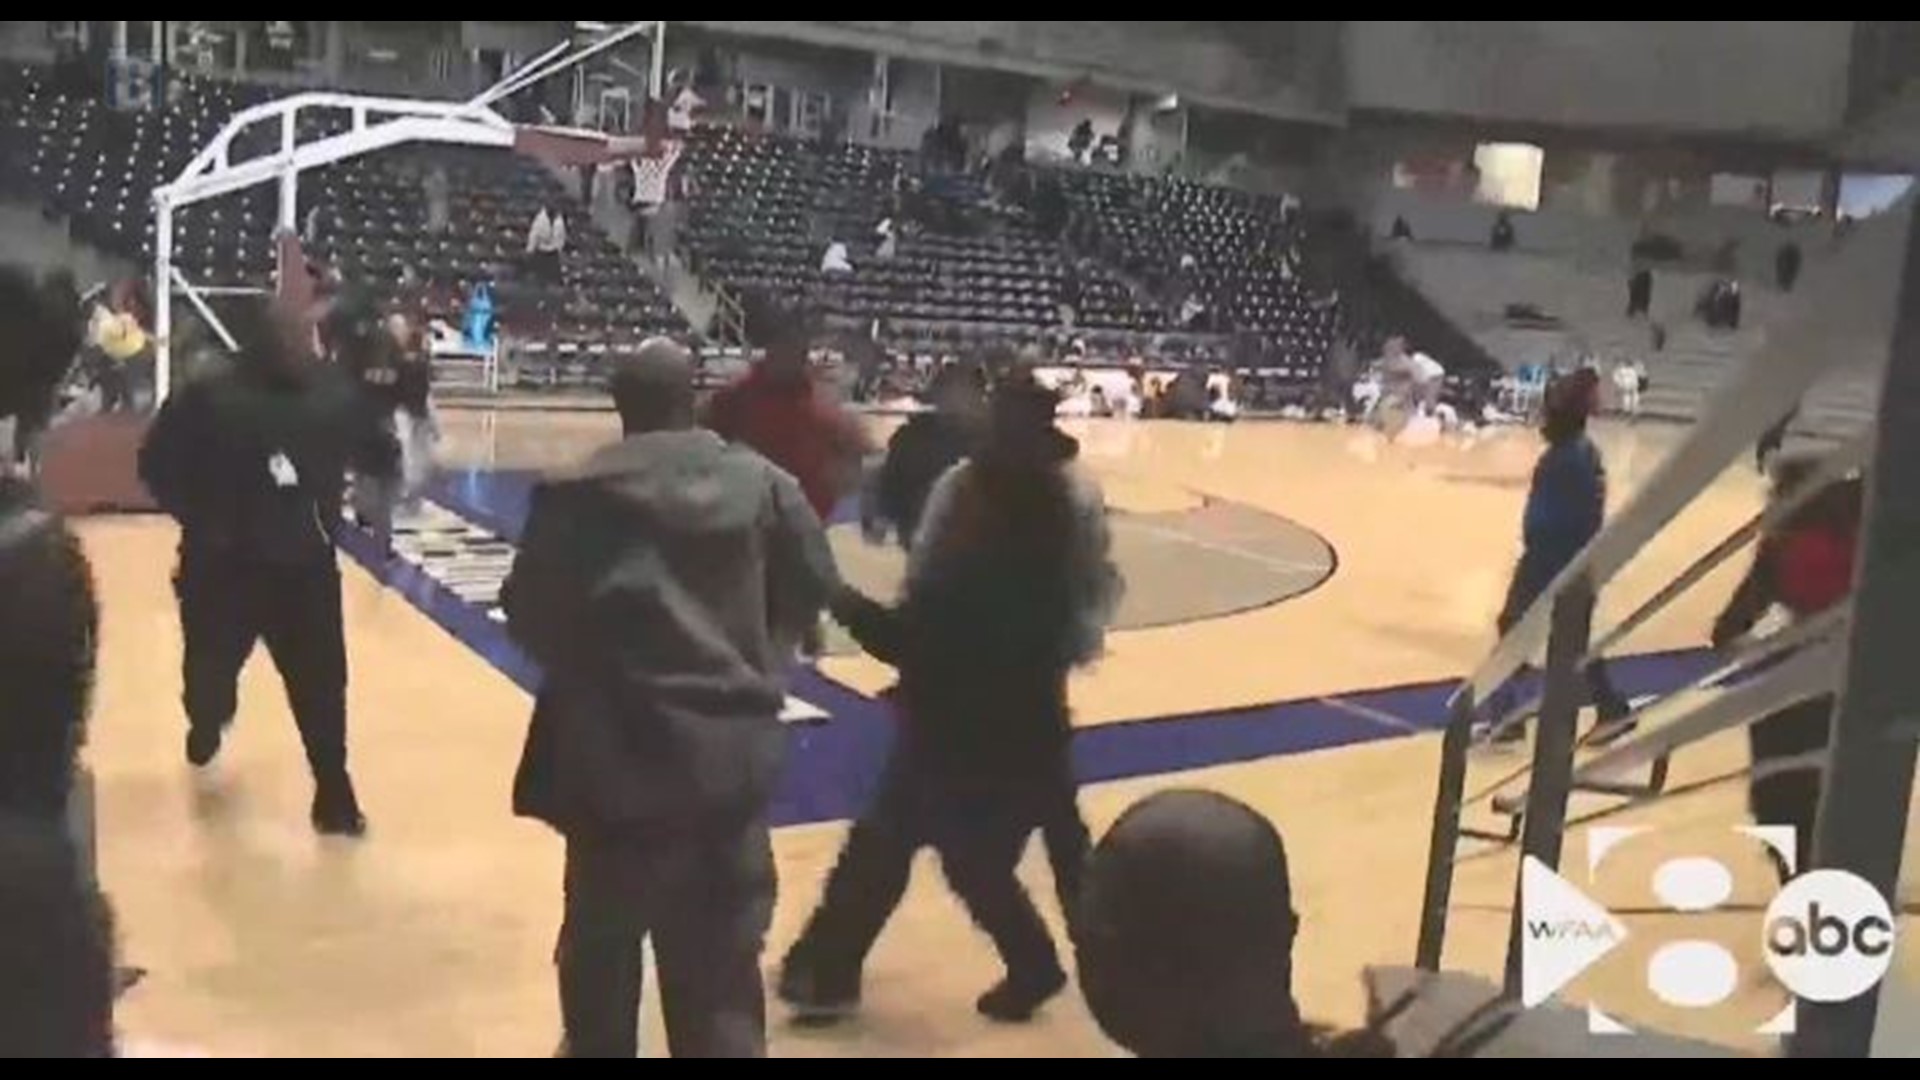 High school basketball game in Dallas ended in a shooting